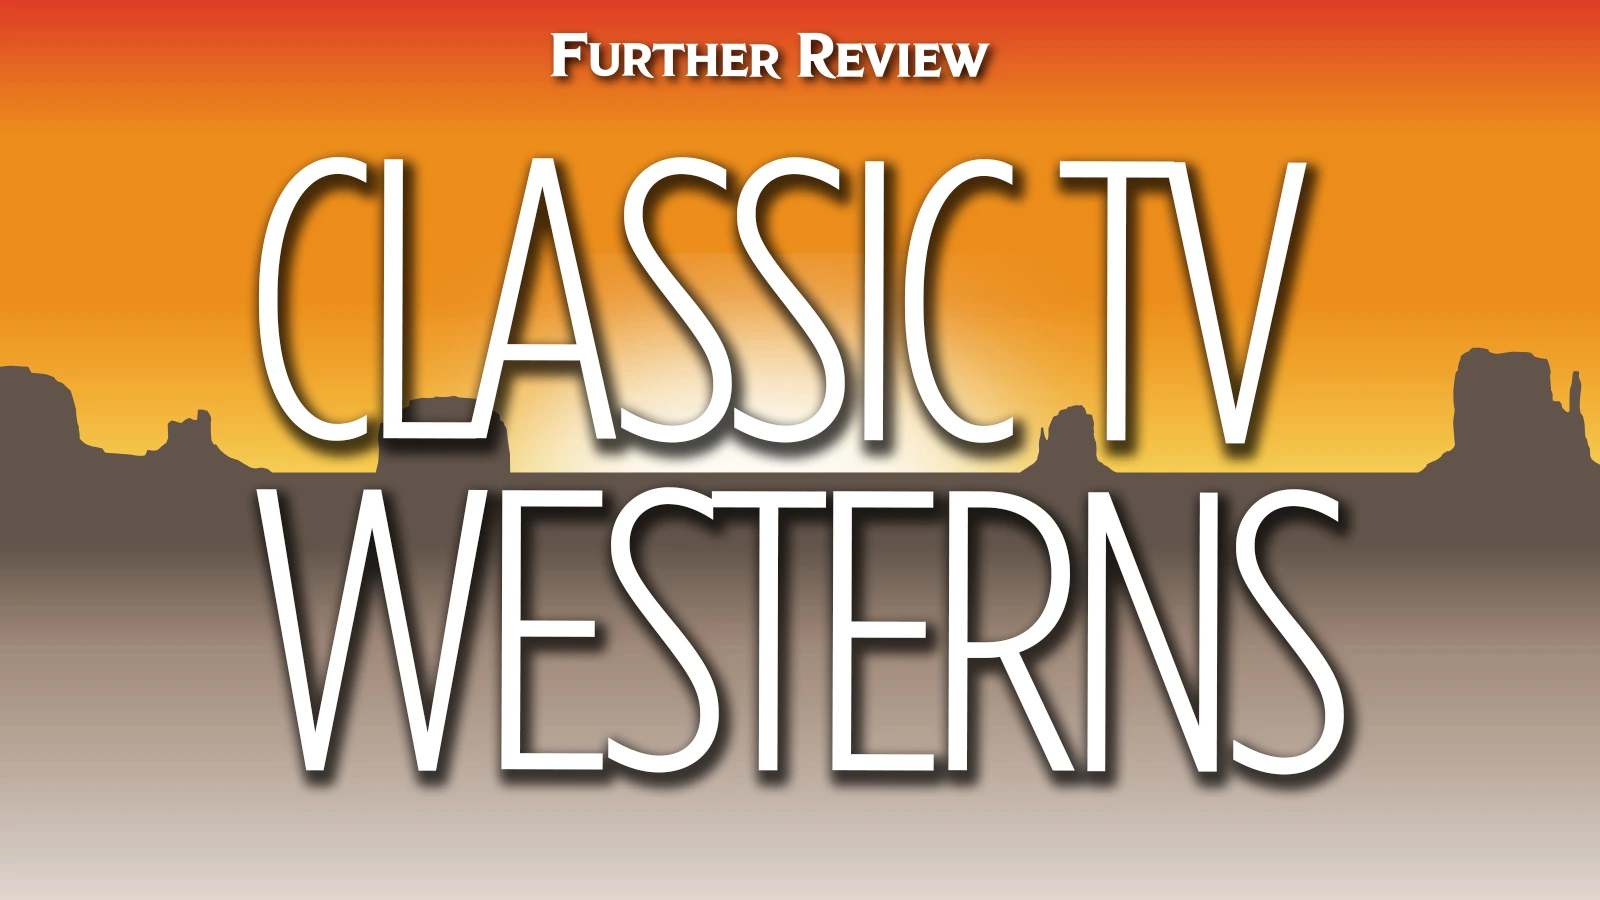 A History of Westerns